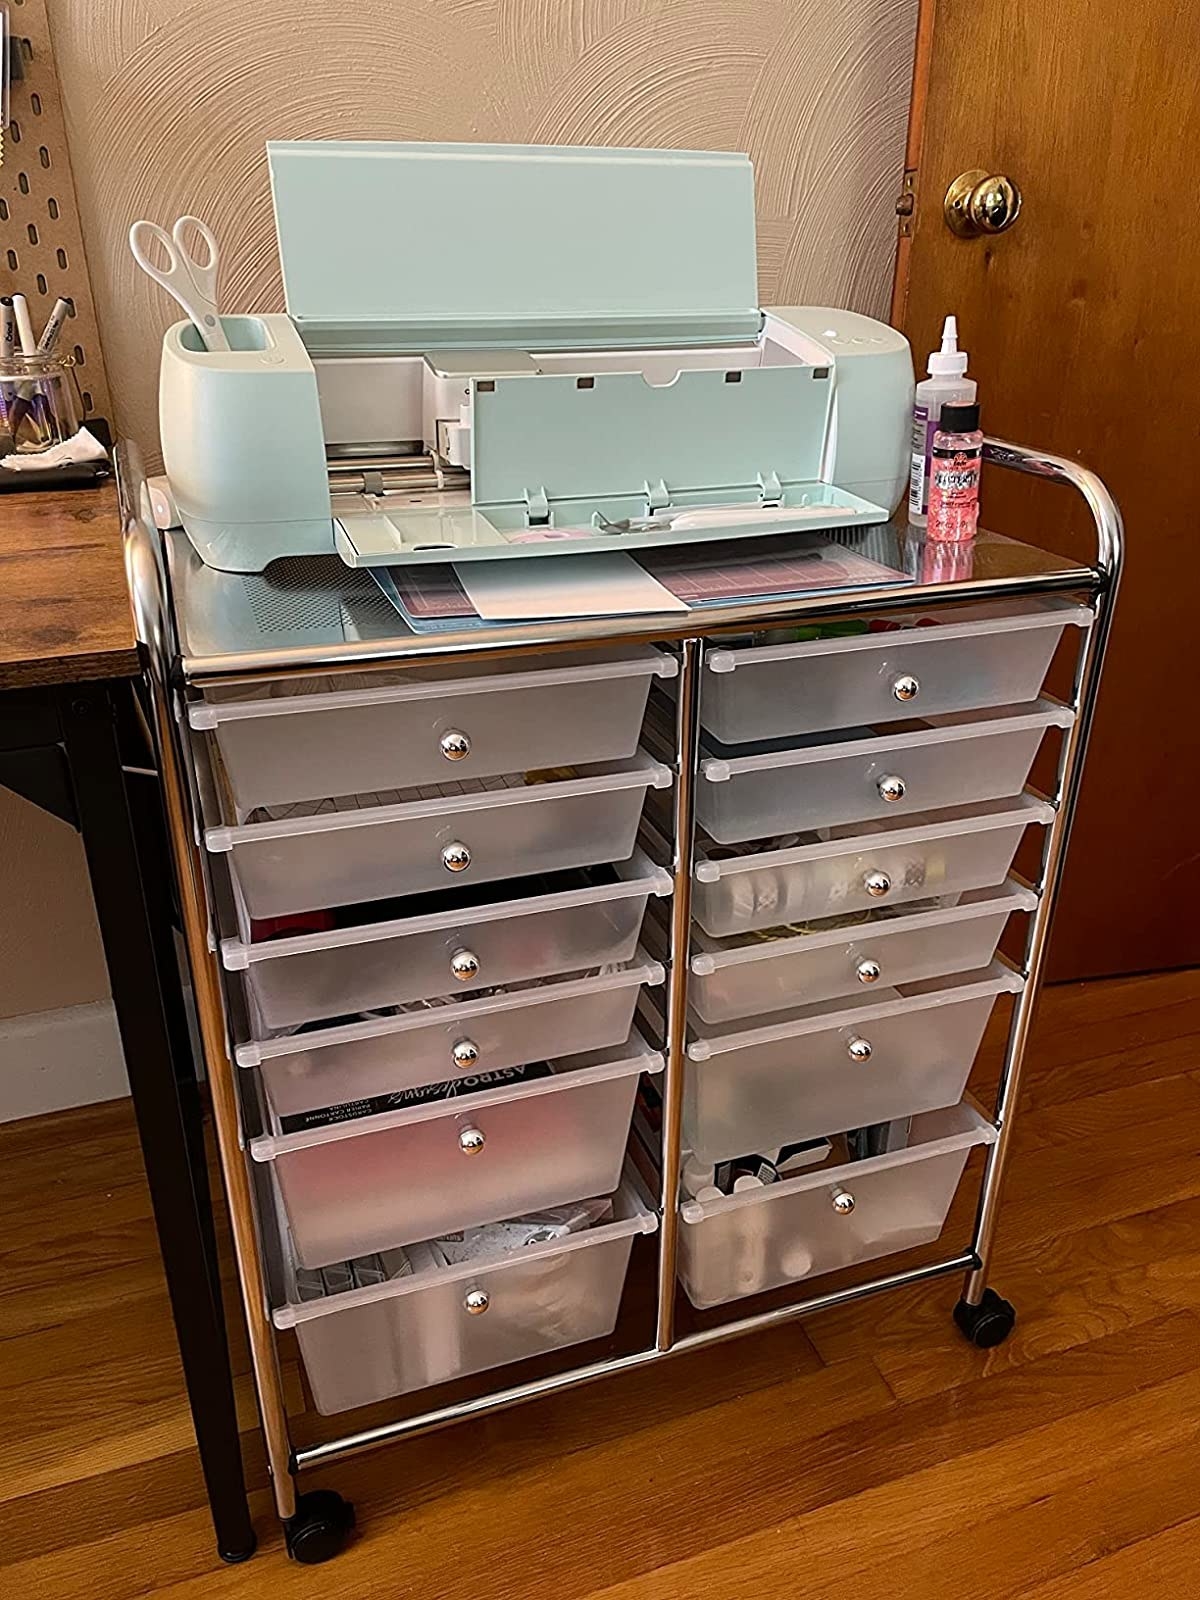 Reviewer image of rolling cart with Cricut cutter on top